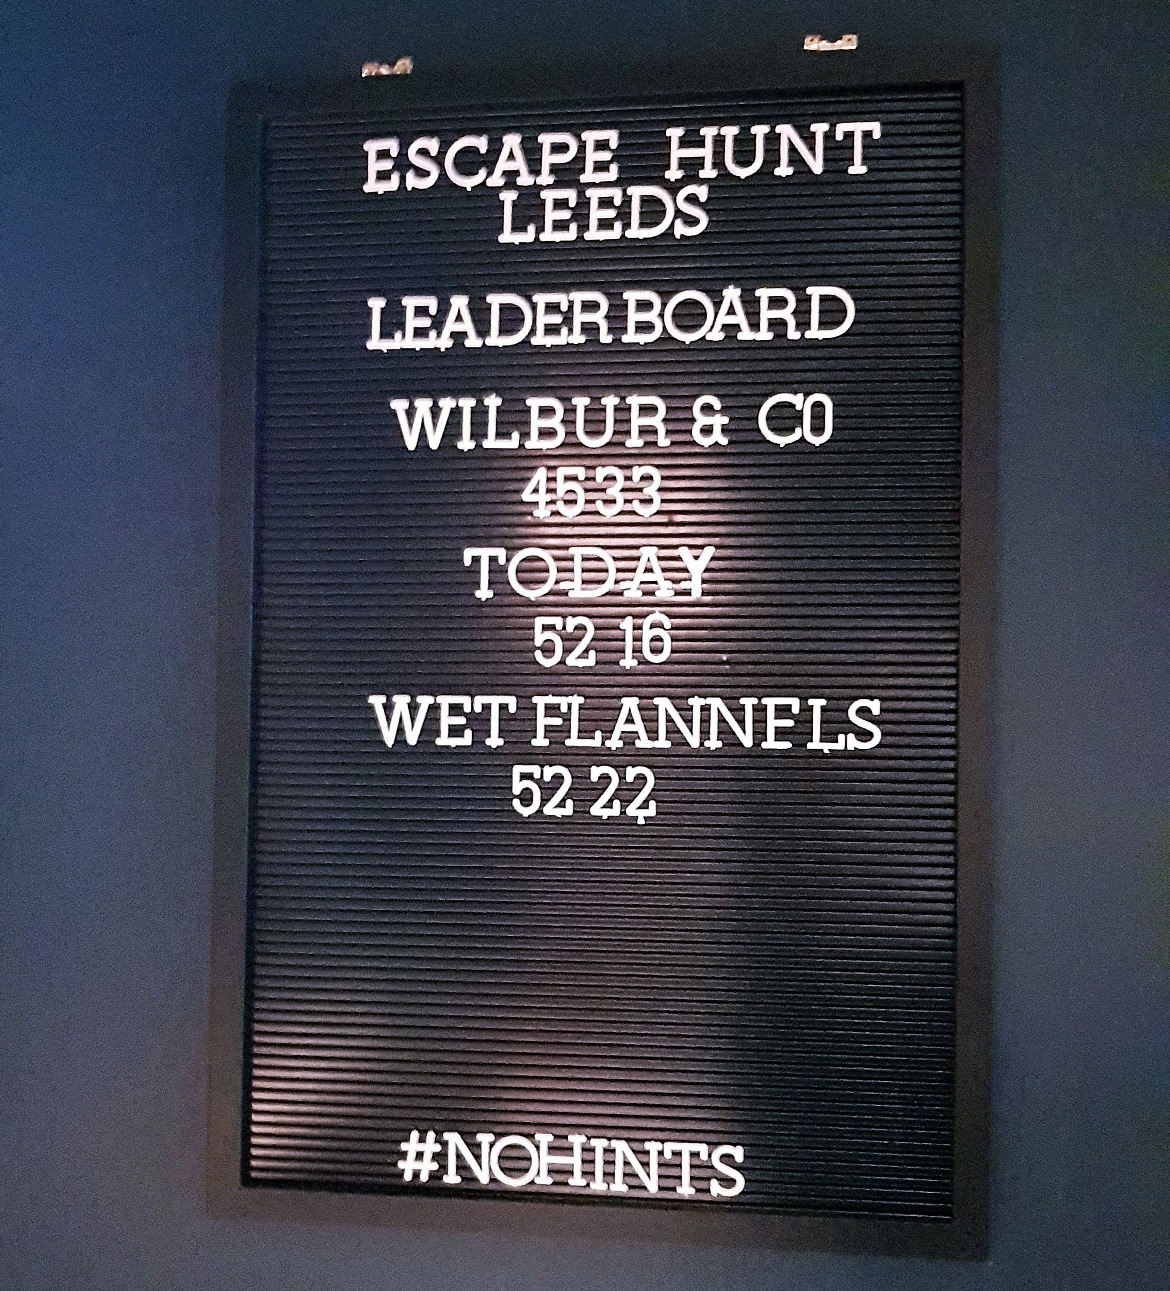 Top 3 leader board before - Our Finest Hour, escape room by Escape Hunt Leeds, review by BeckyBecky Blogs